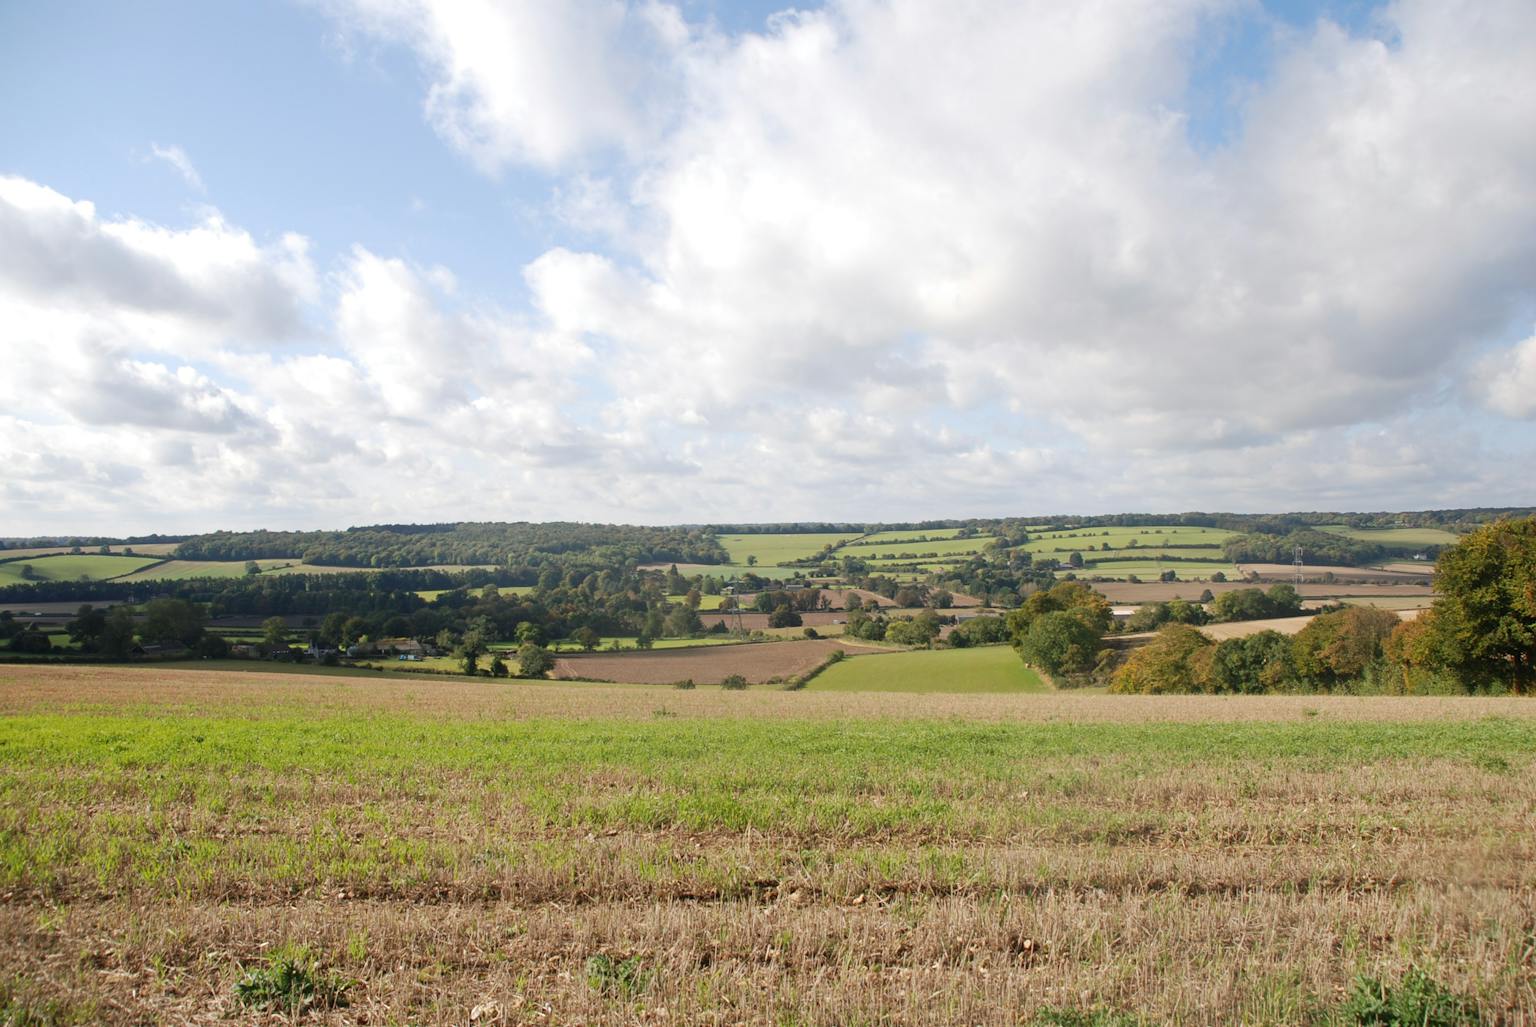 A scenic view of a lush green field with rolling hills in the background on a sunny day